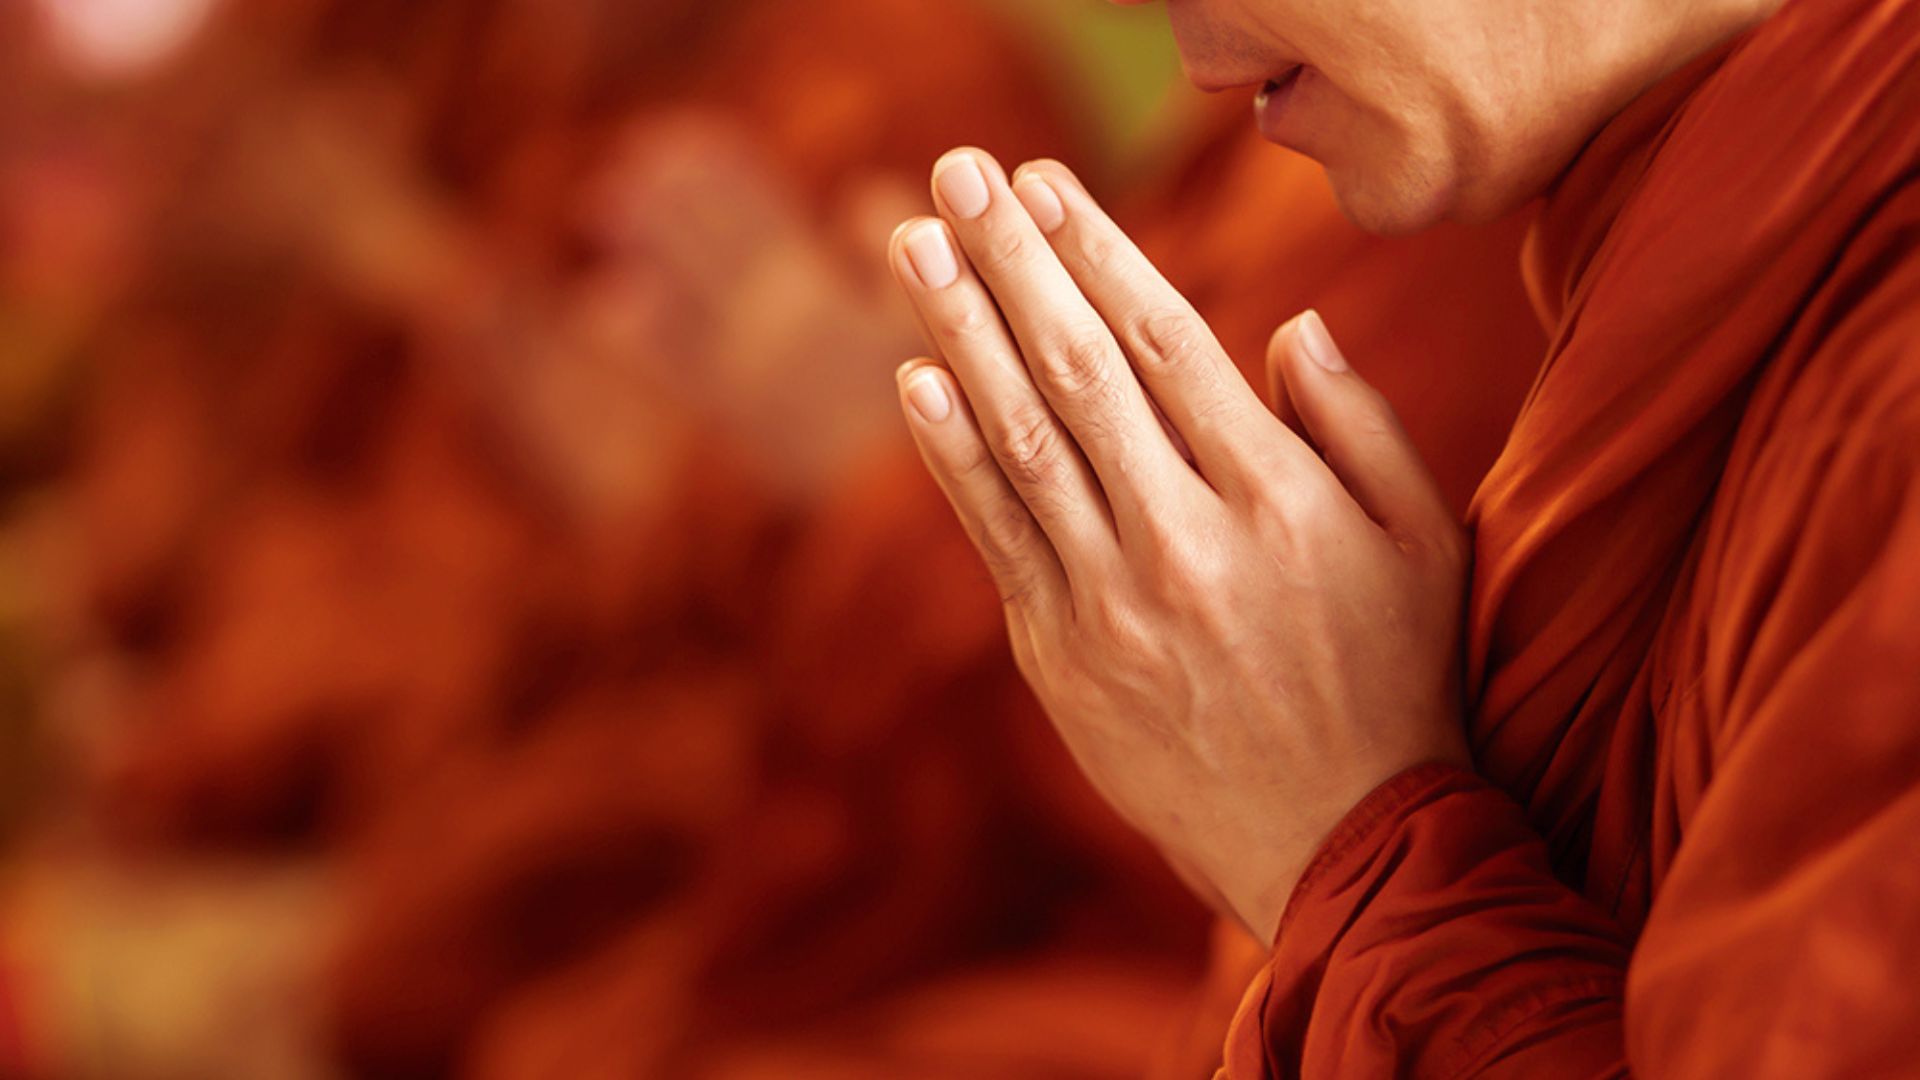 A Buddhist Praying With Both Hands Raised